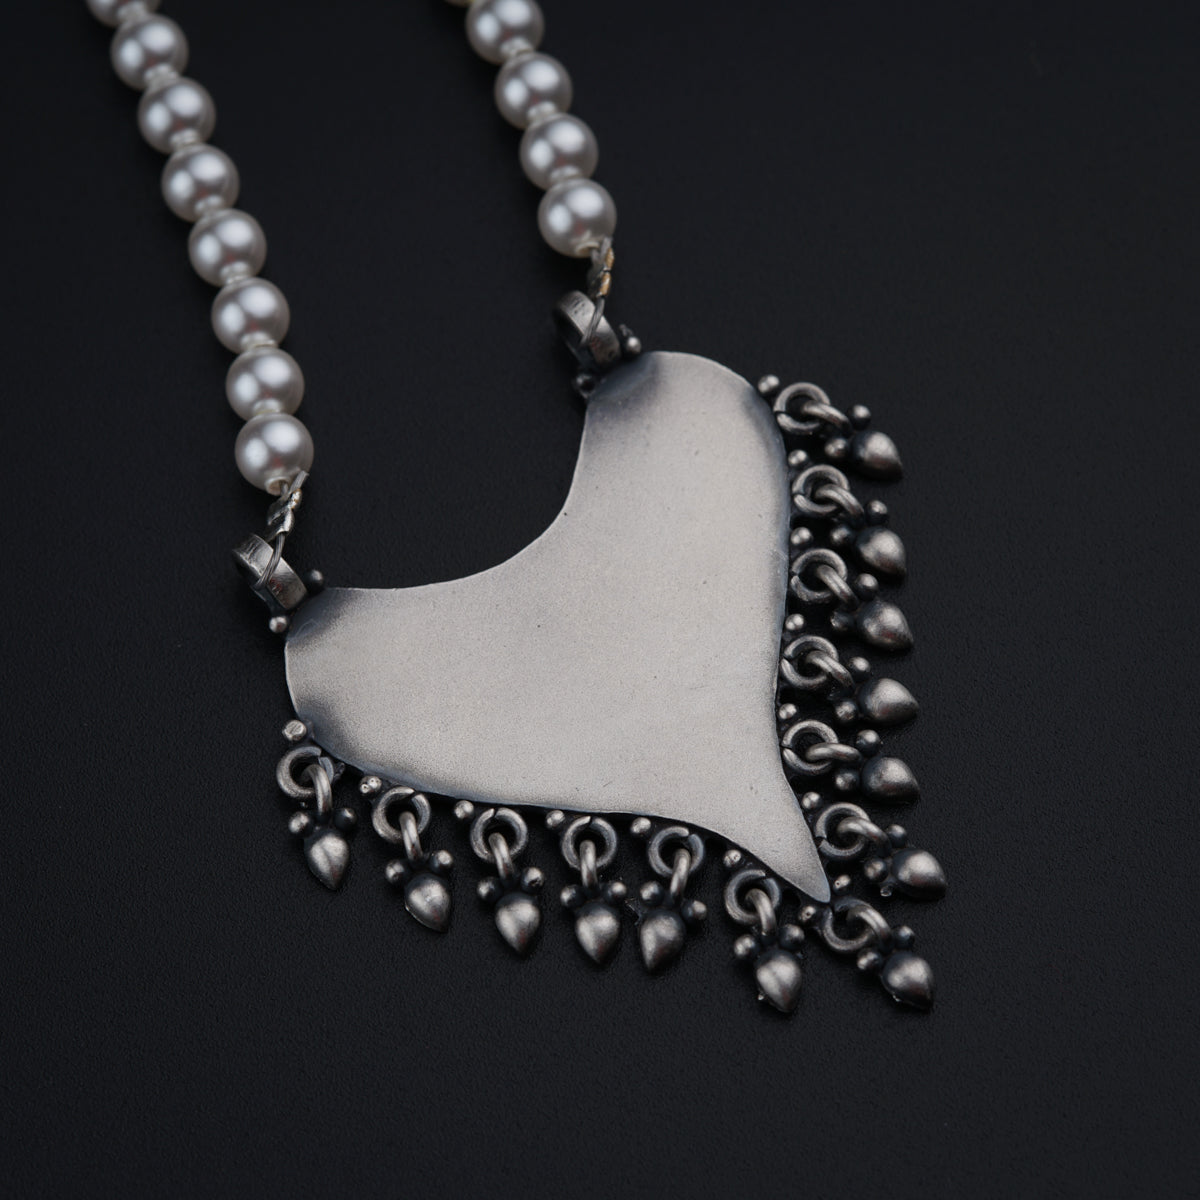 Ambition Pendant Necklace with High Quality Pearls